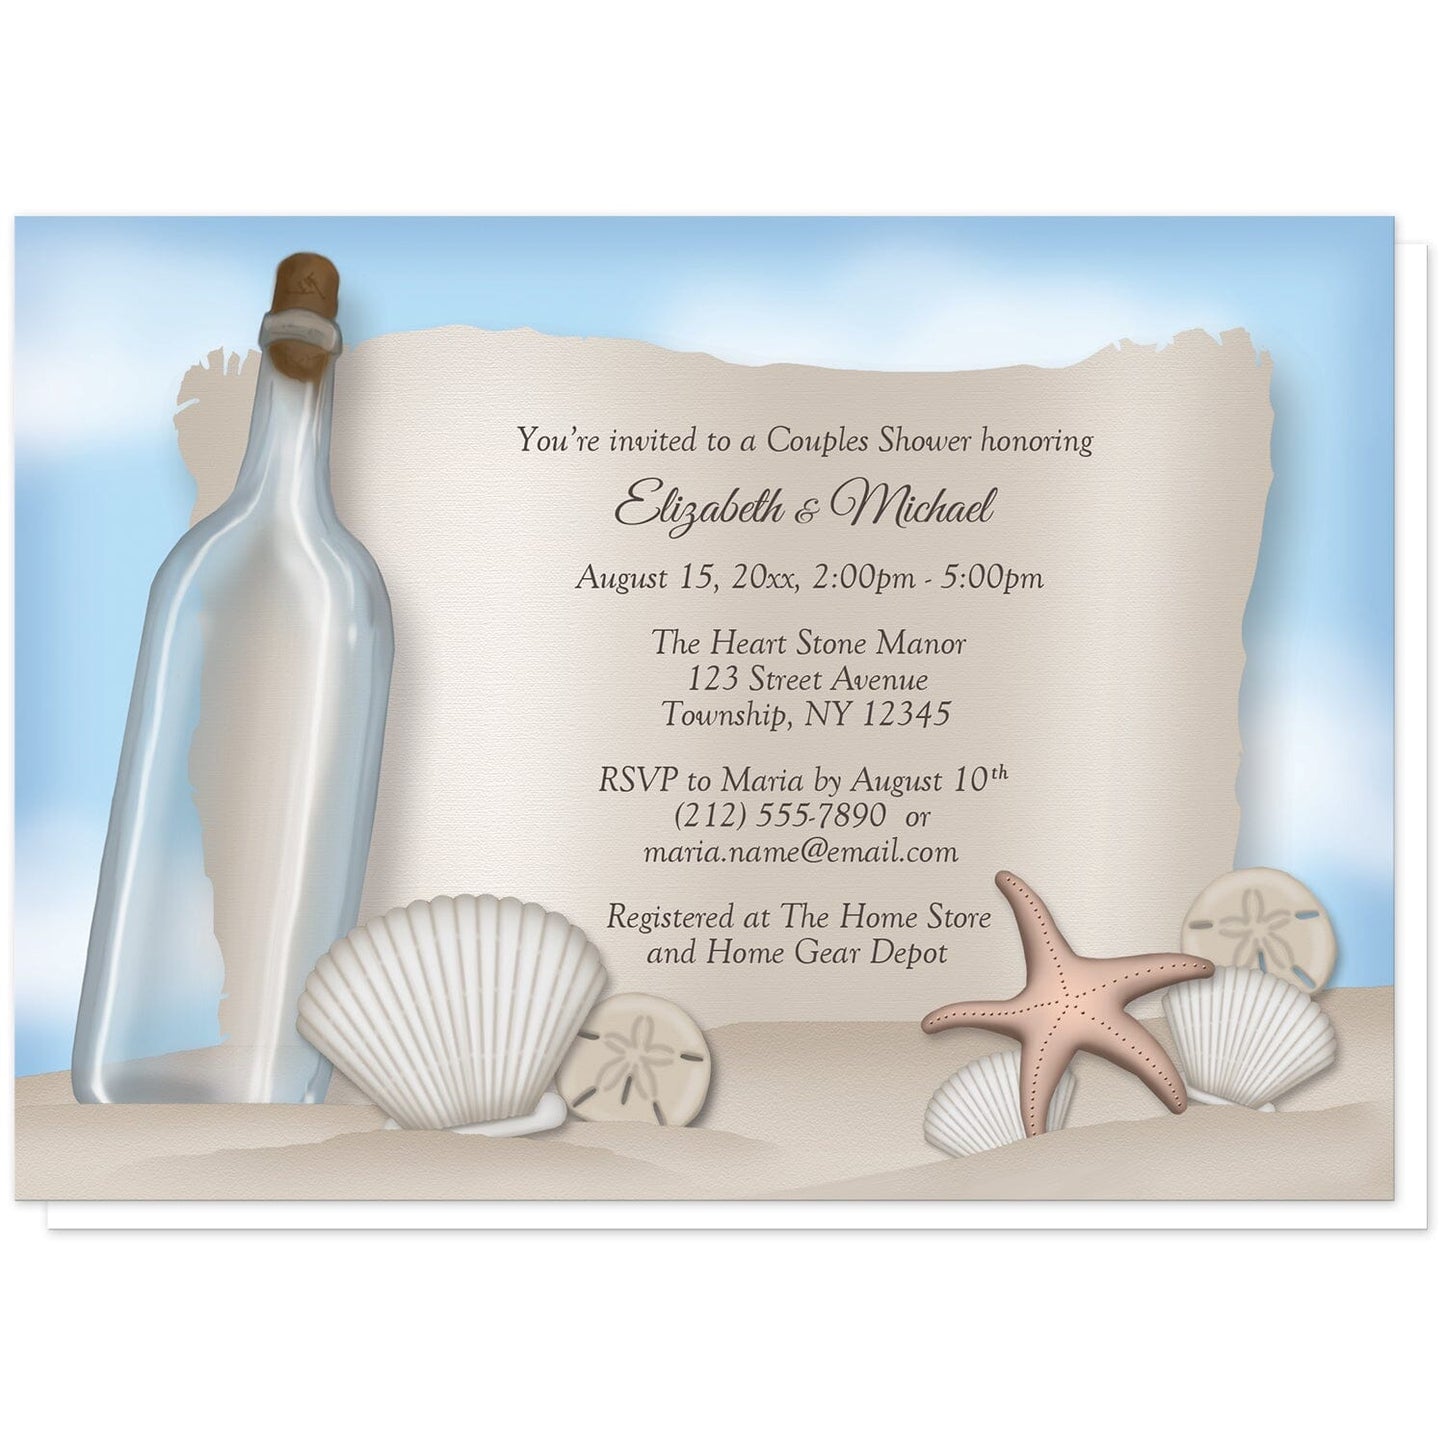 Message from a Bottle Beach Couples Shower Invitations at Artistically Invited. Message from a bottle beach couples shower invitations with an "on the beach" and "message from a bottle" theme. They're designed with an illustrated empty glass bottle, a paper message area, beige sand, a blue sky, and assorted seashells. Your personalized couples shower celebration details are custom printed in brown over the paper illustration.